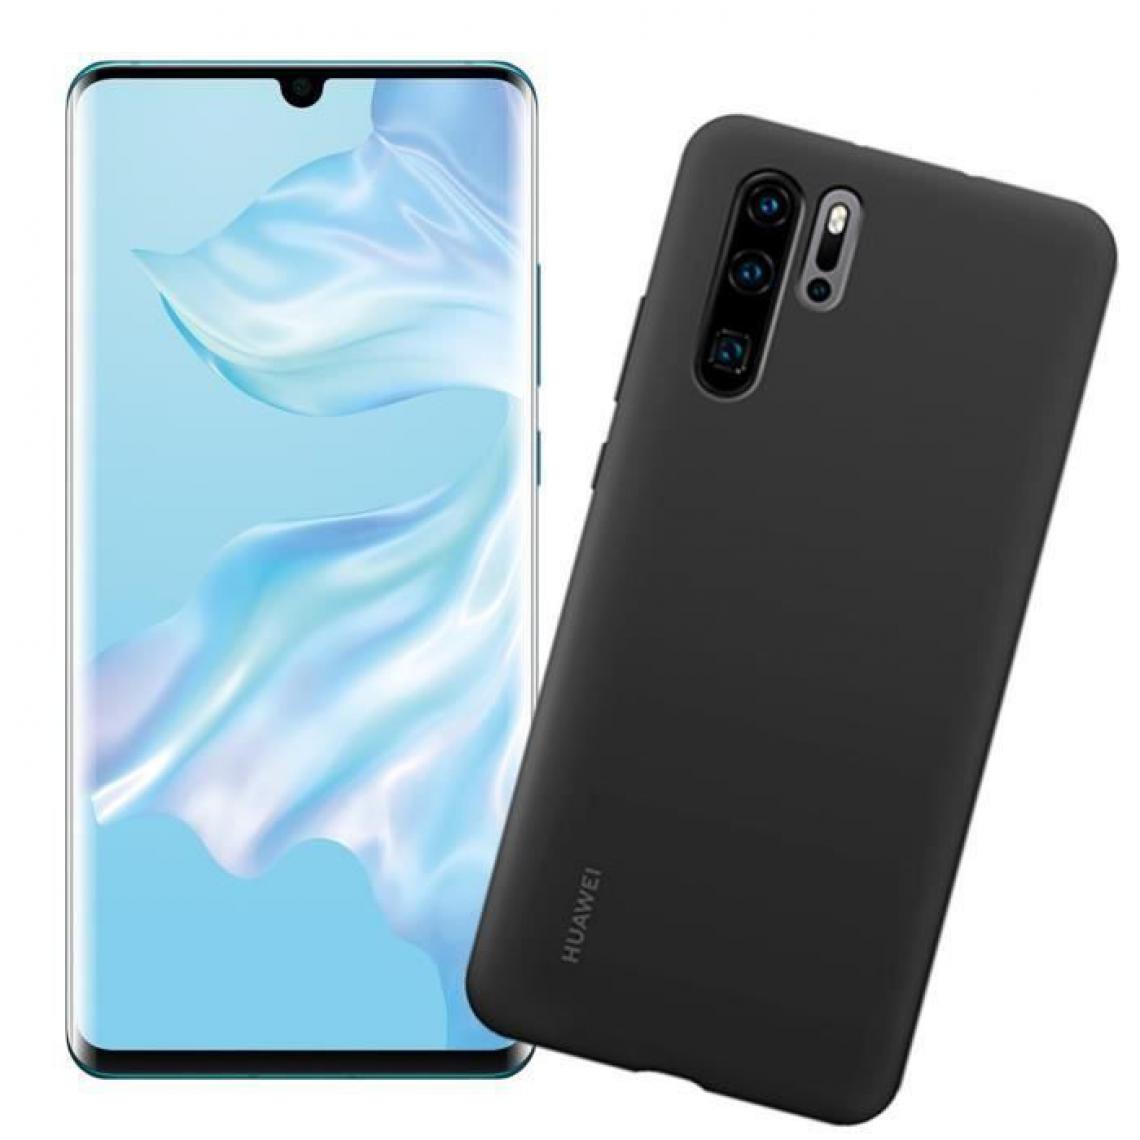 Huawei - HUAWEI P30 Pro 128GB Noir + Coque Noir - Smartphone Android